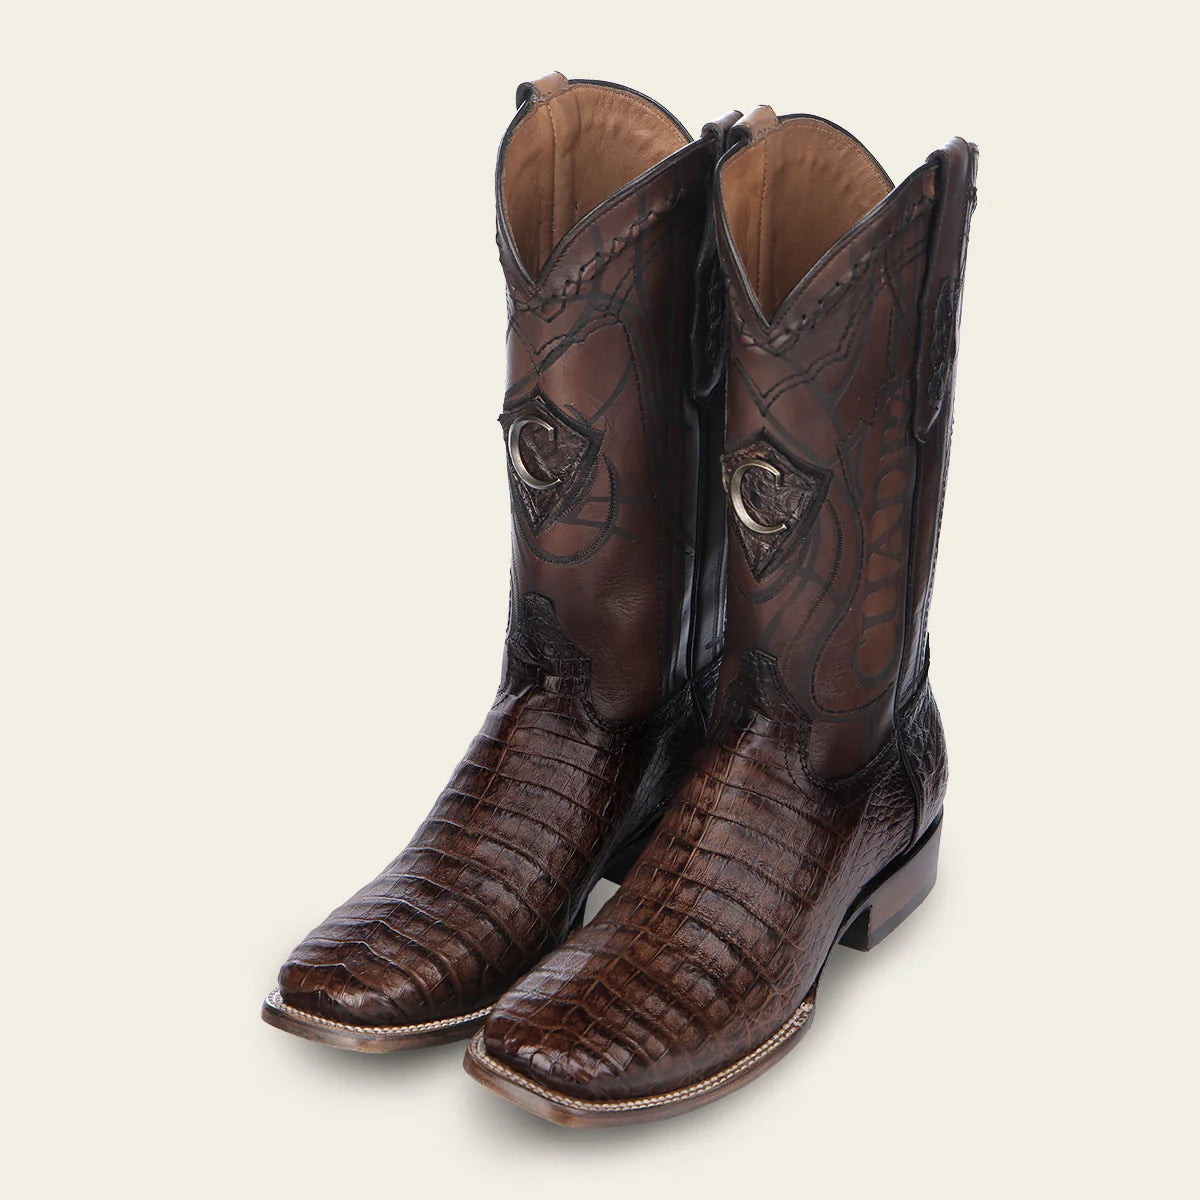 3Z2LFY - Cuadra honey cowboy rodeo caiman leather boots for men